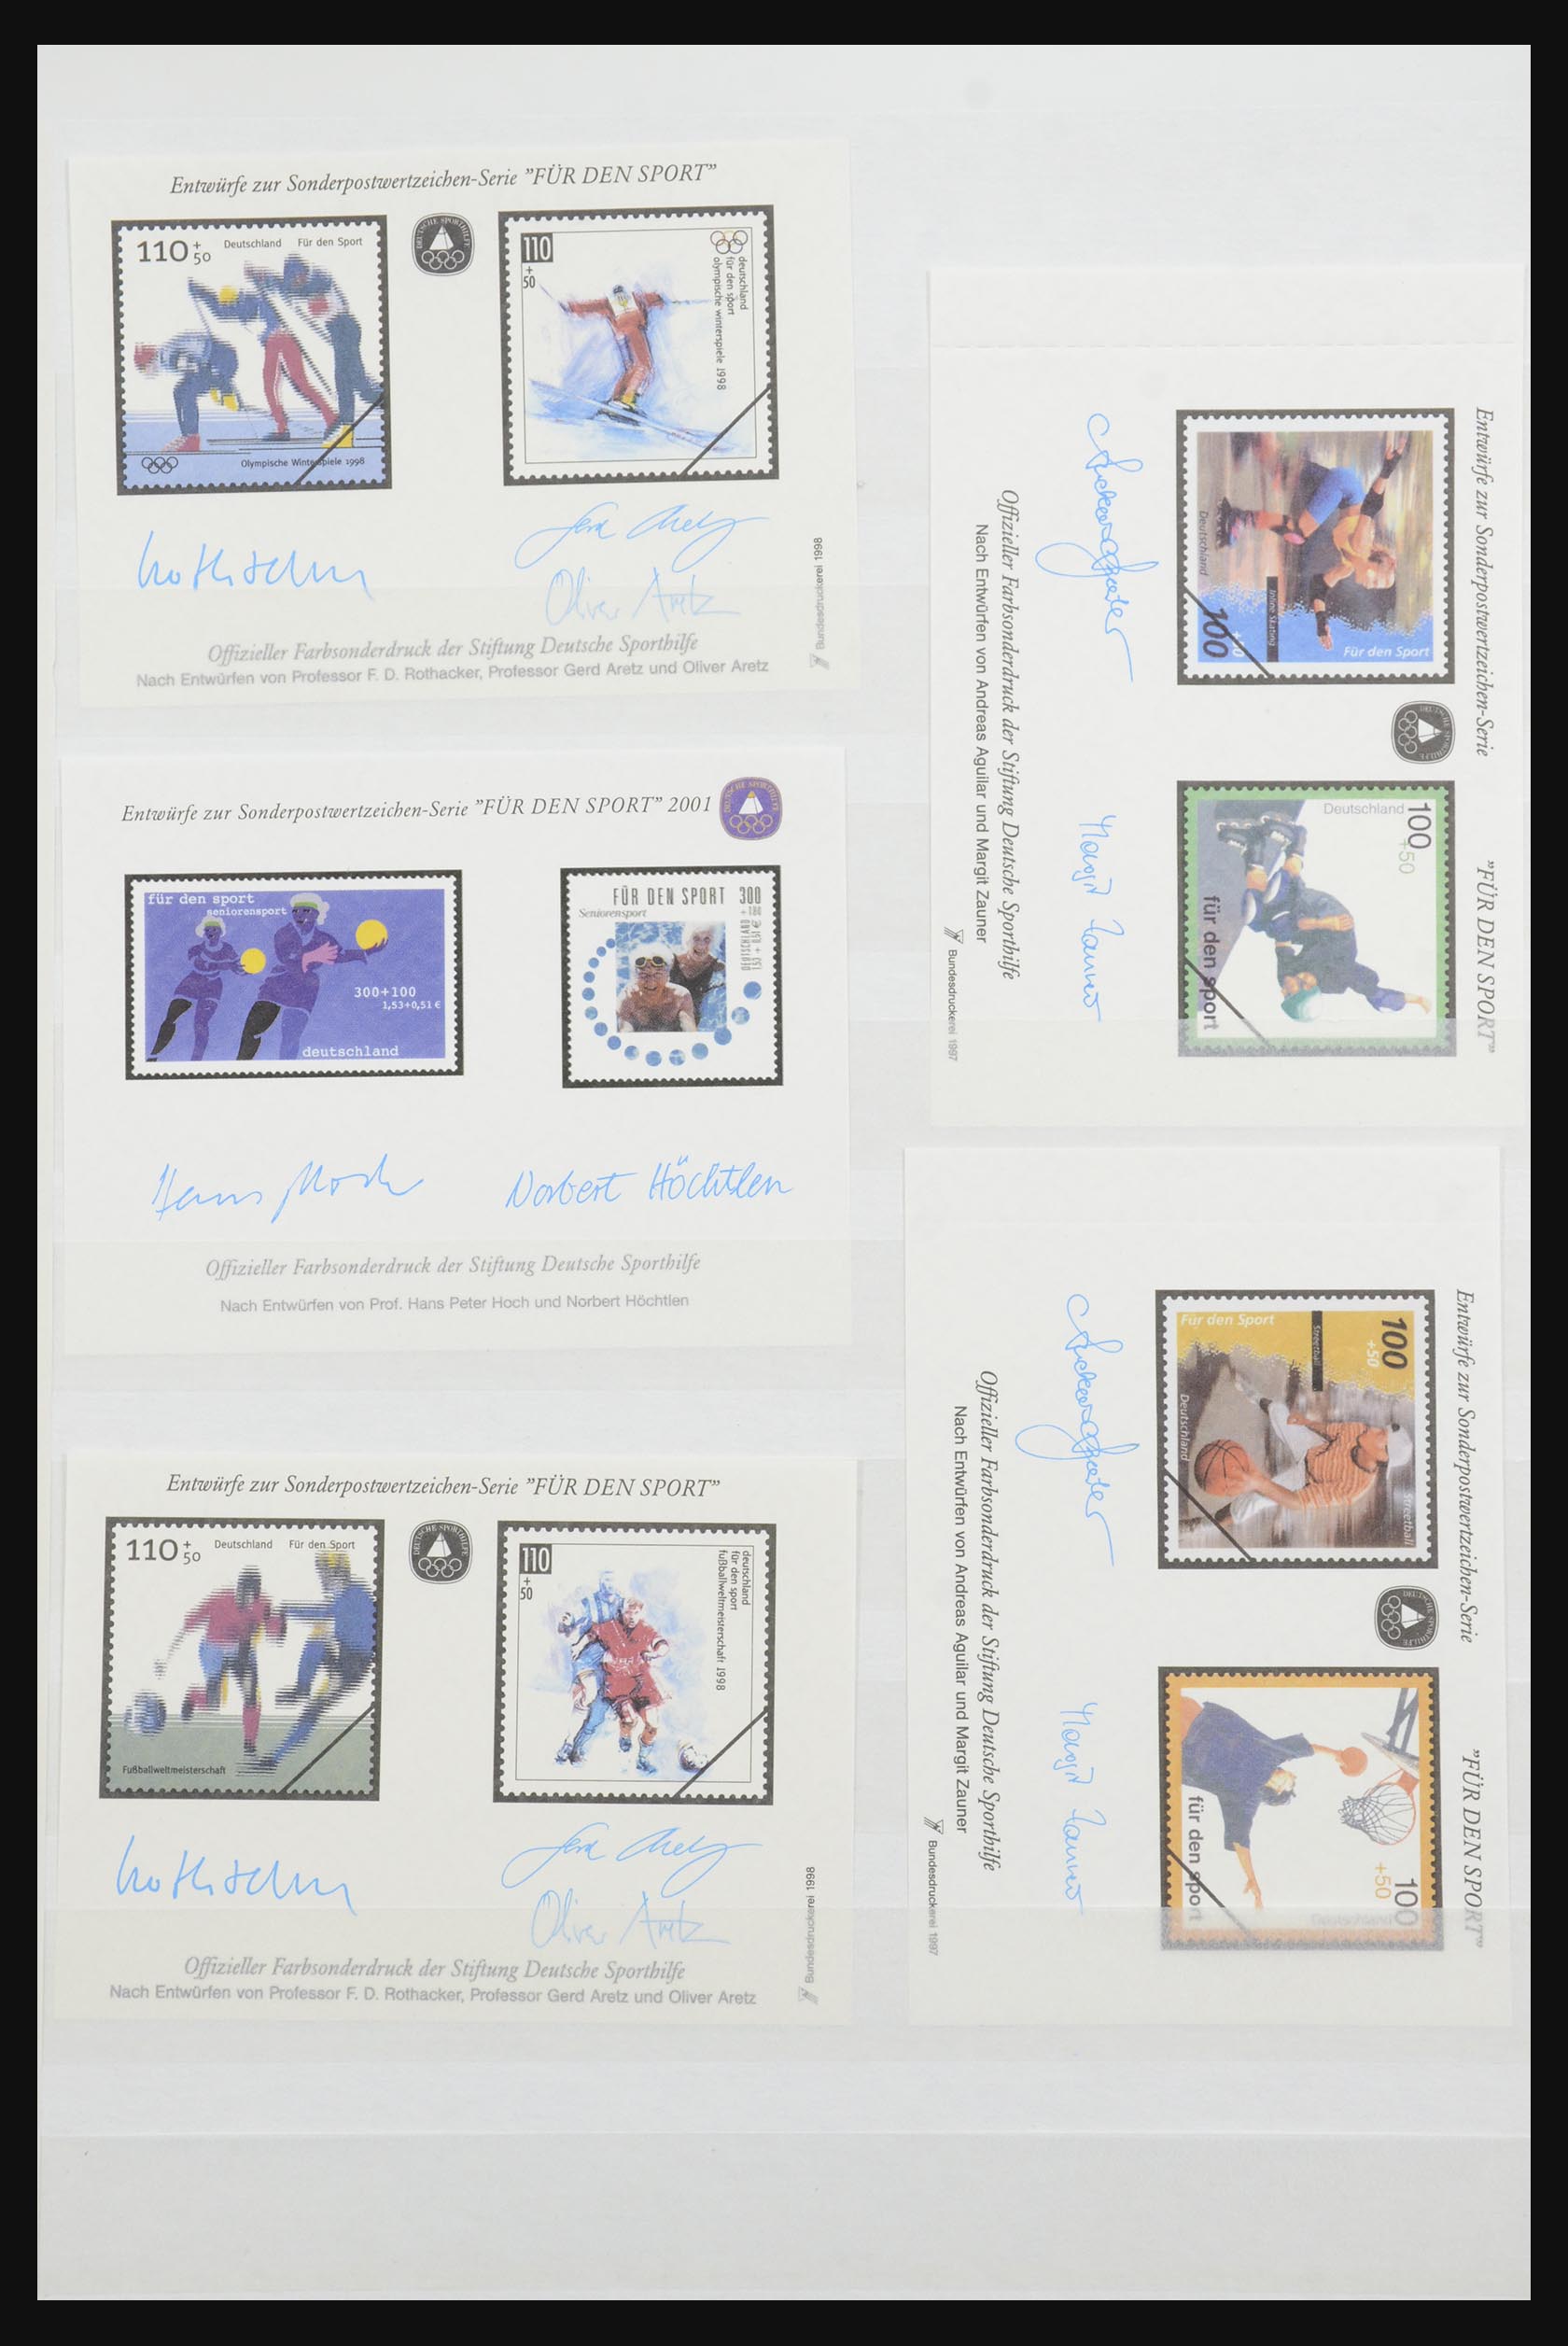 32050 024 - 32050 Bundespost special sheets 1980-2010.